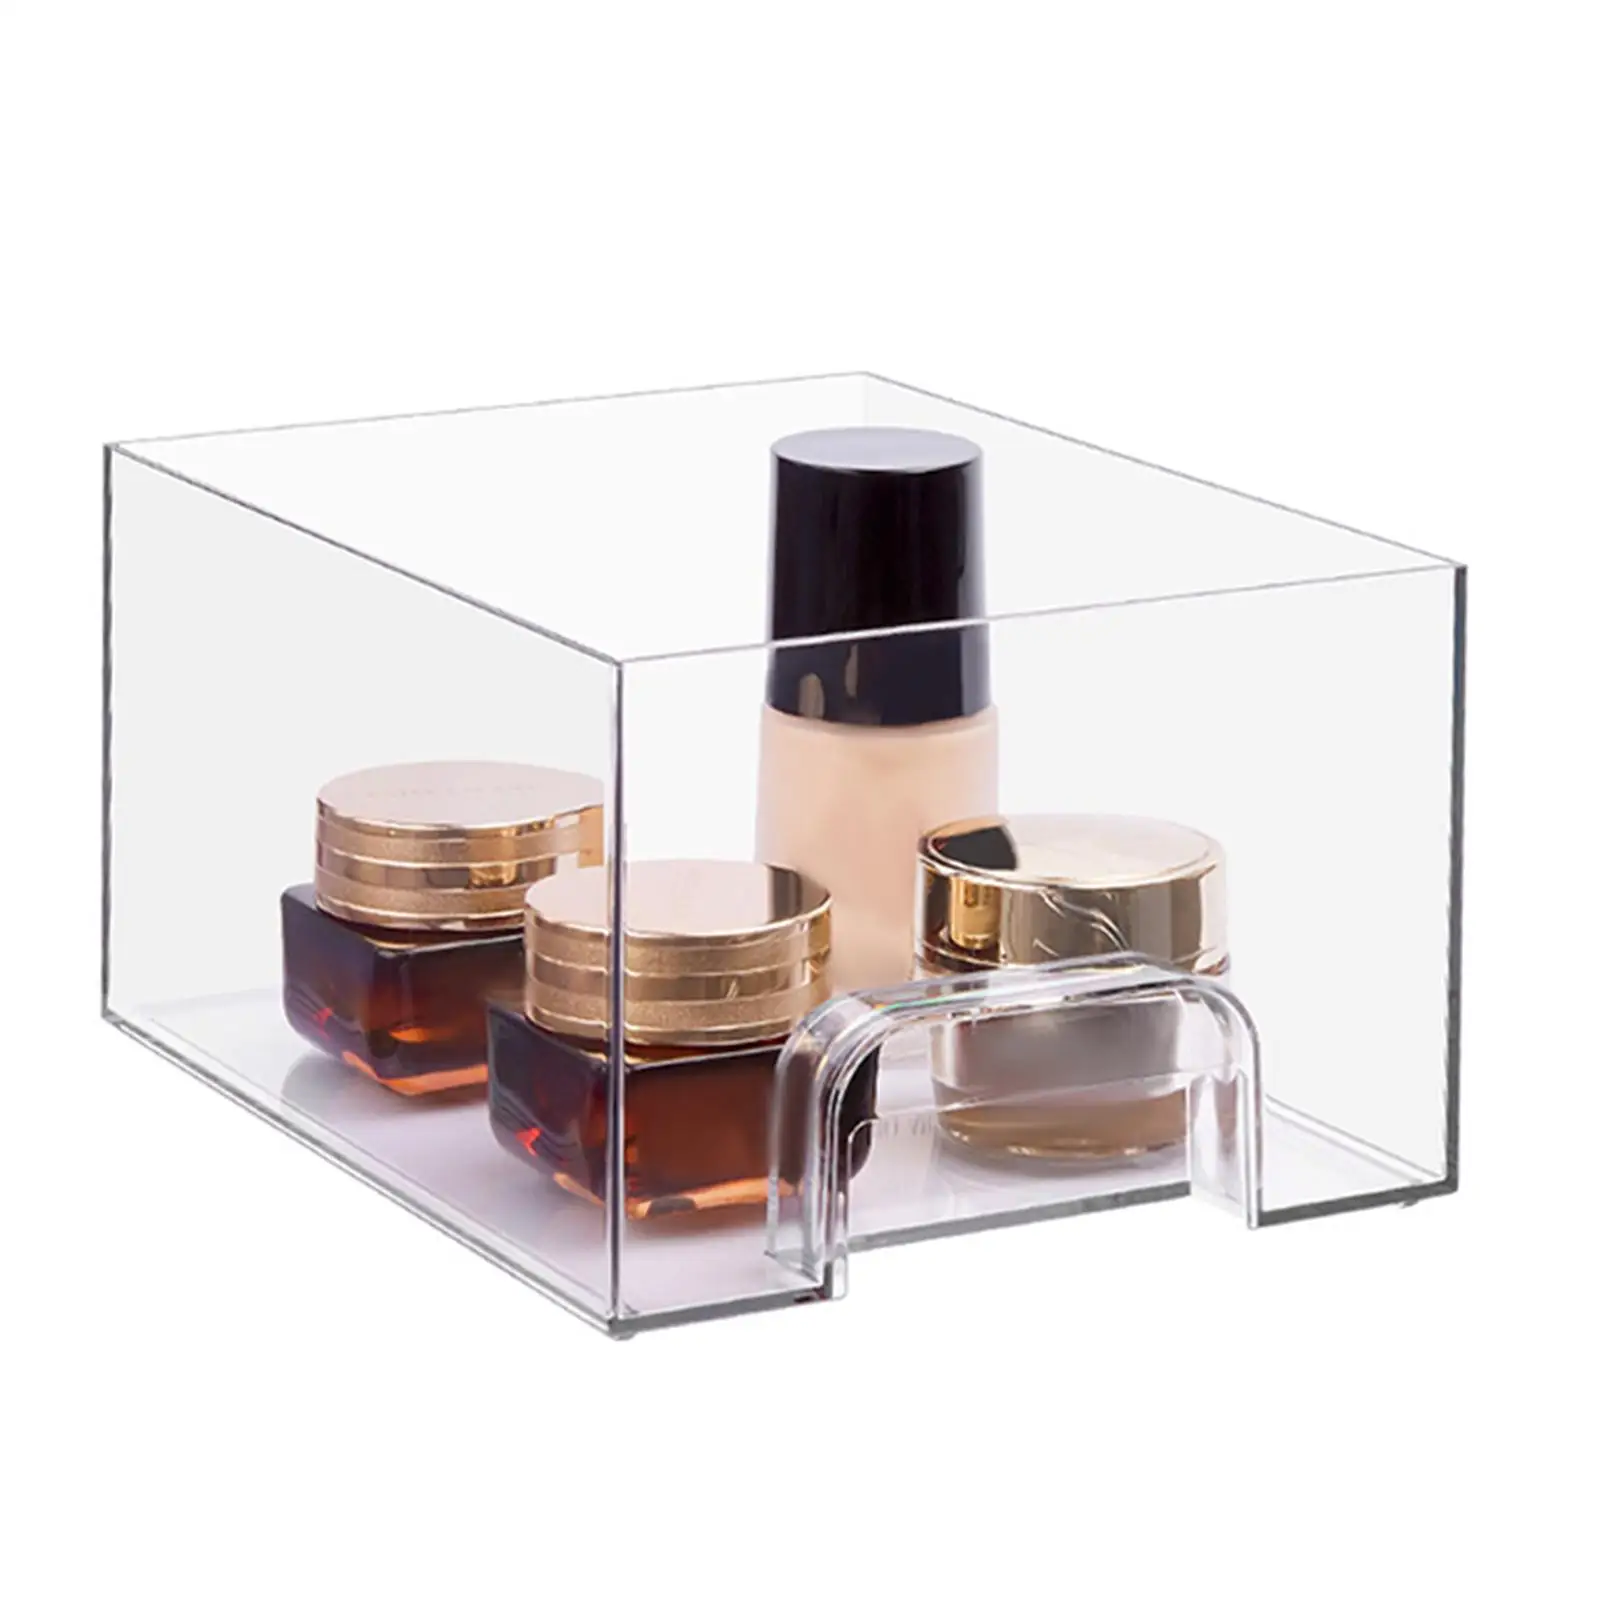 Makeup Organizer Drawers for Bathroom Counter Home Organization and Storage